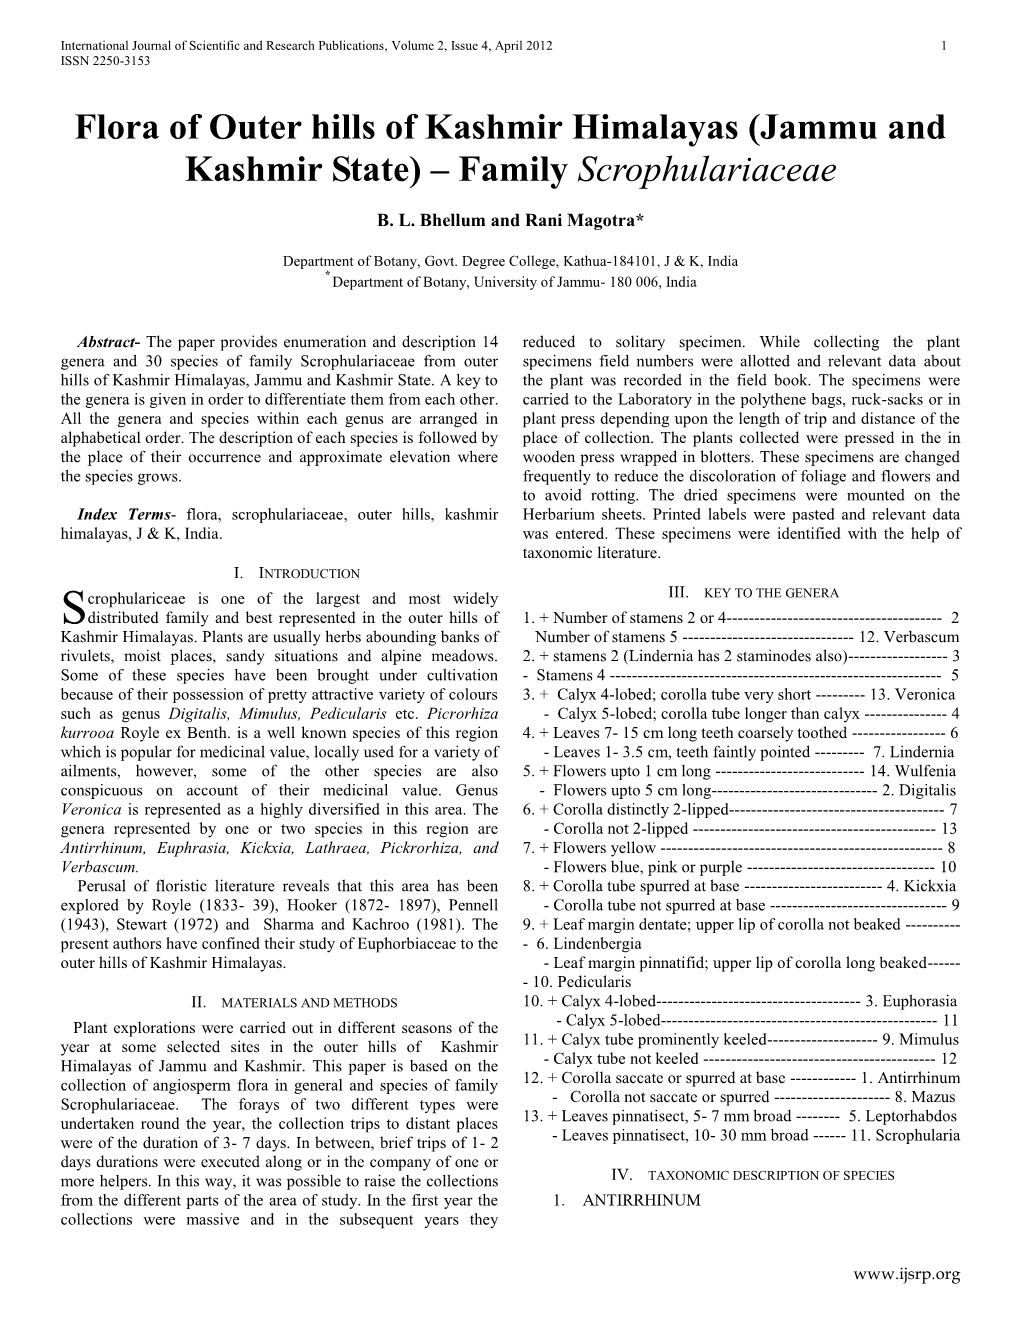 Flora of Outer Hills of Kashmir Himalayas (Jammu and Kashmir State) – Family Scrophulariaceae